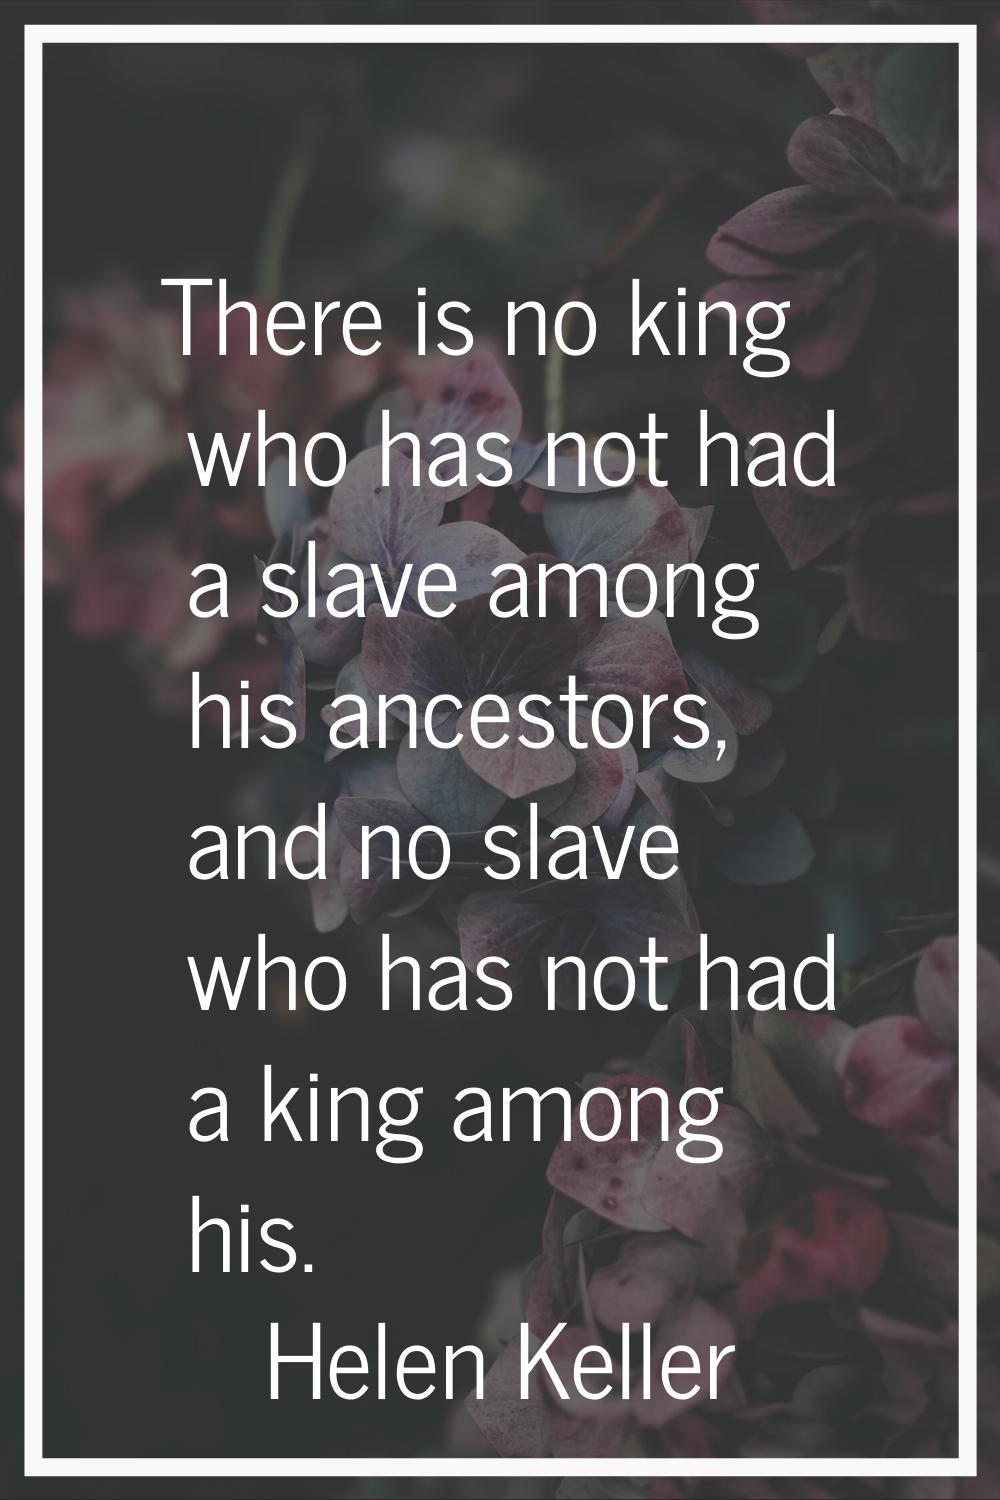 There is no king who has not had a slave among his ancestors, and no slave who has not had a king a